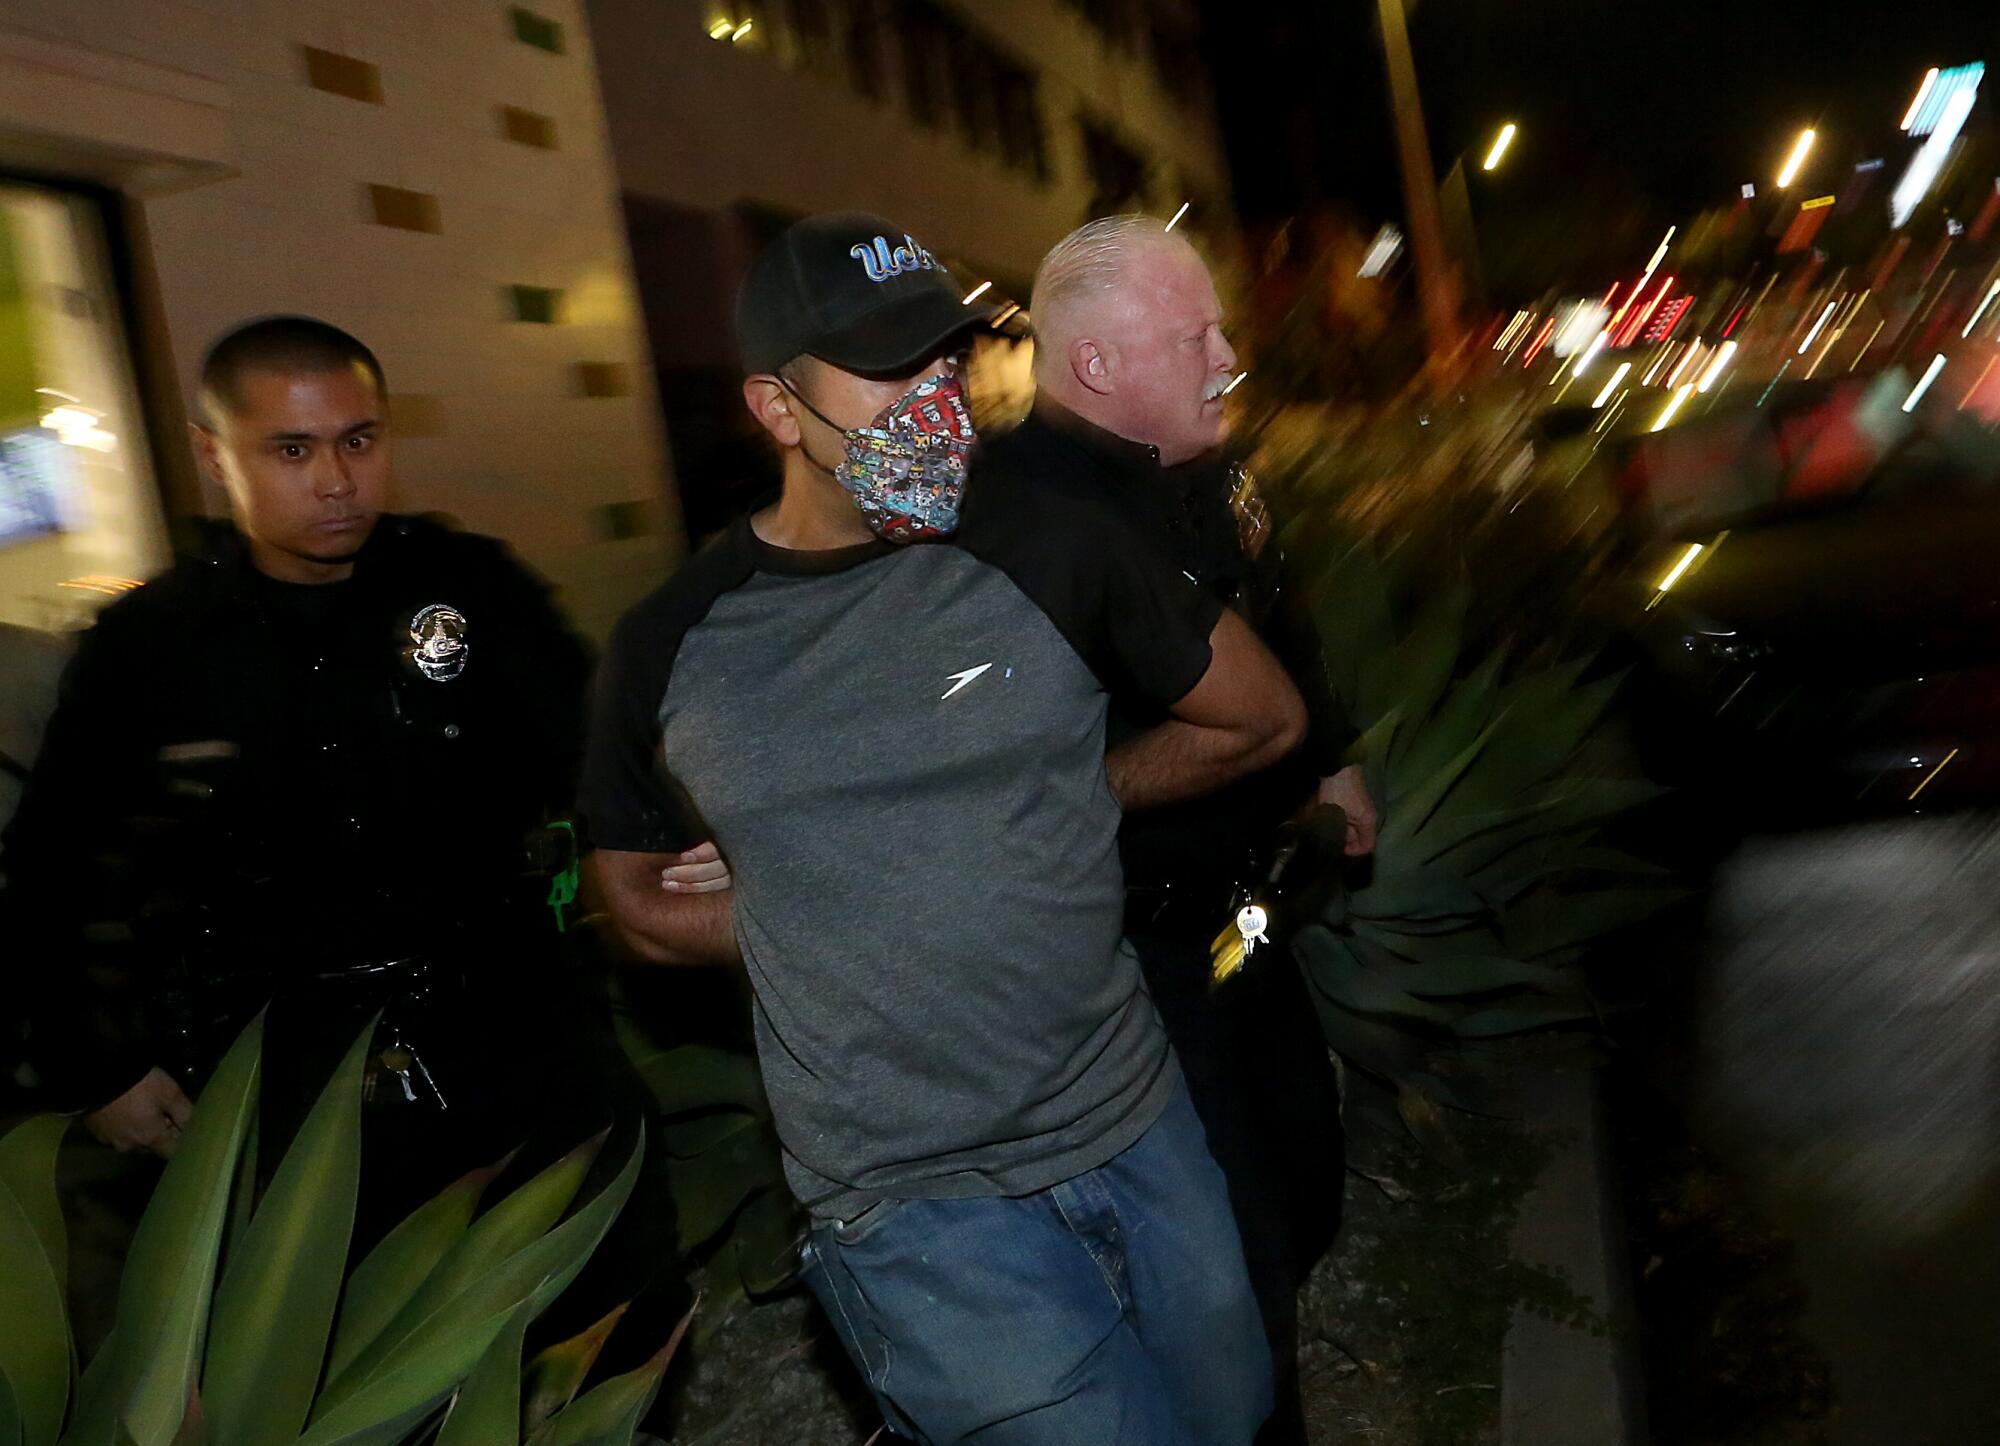 A pro-Palestine supporter is detained by police outside The Museum of Tolerance in Los Angeles.